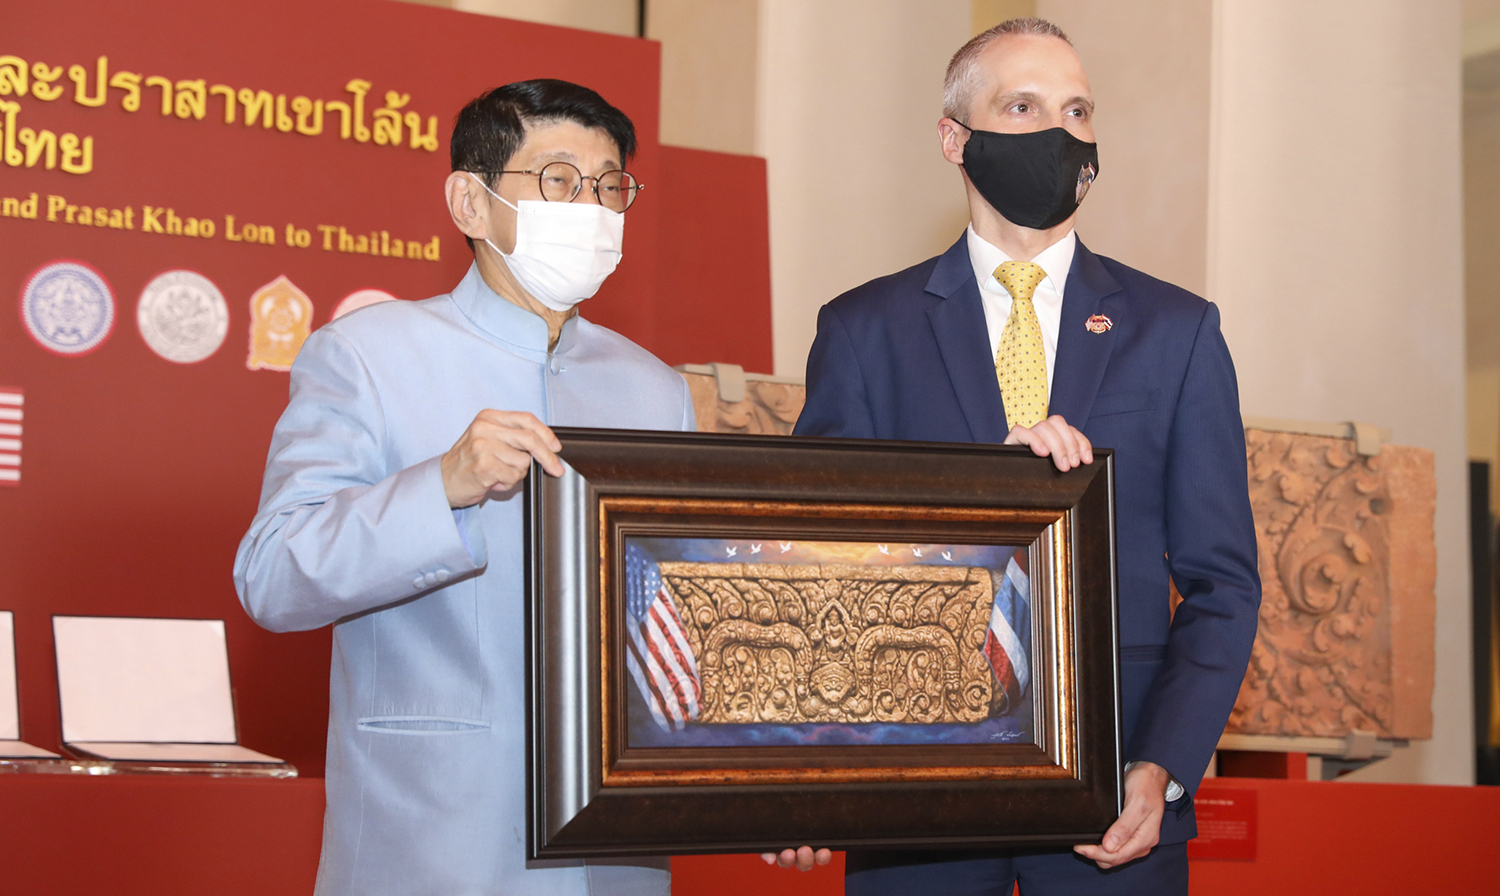 ICE returns ancient stone lintels to Thailand